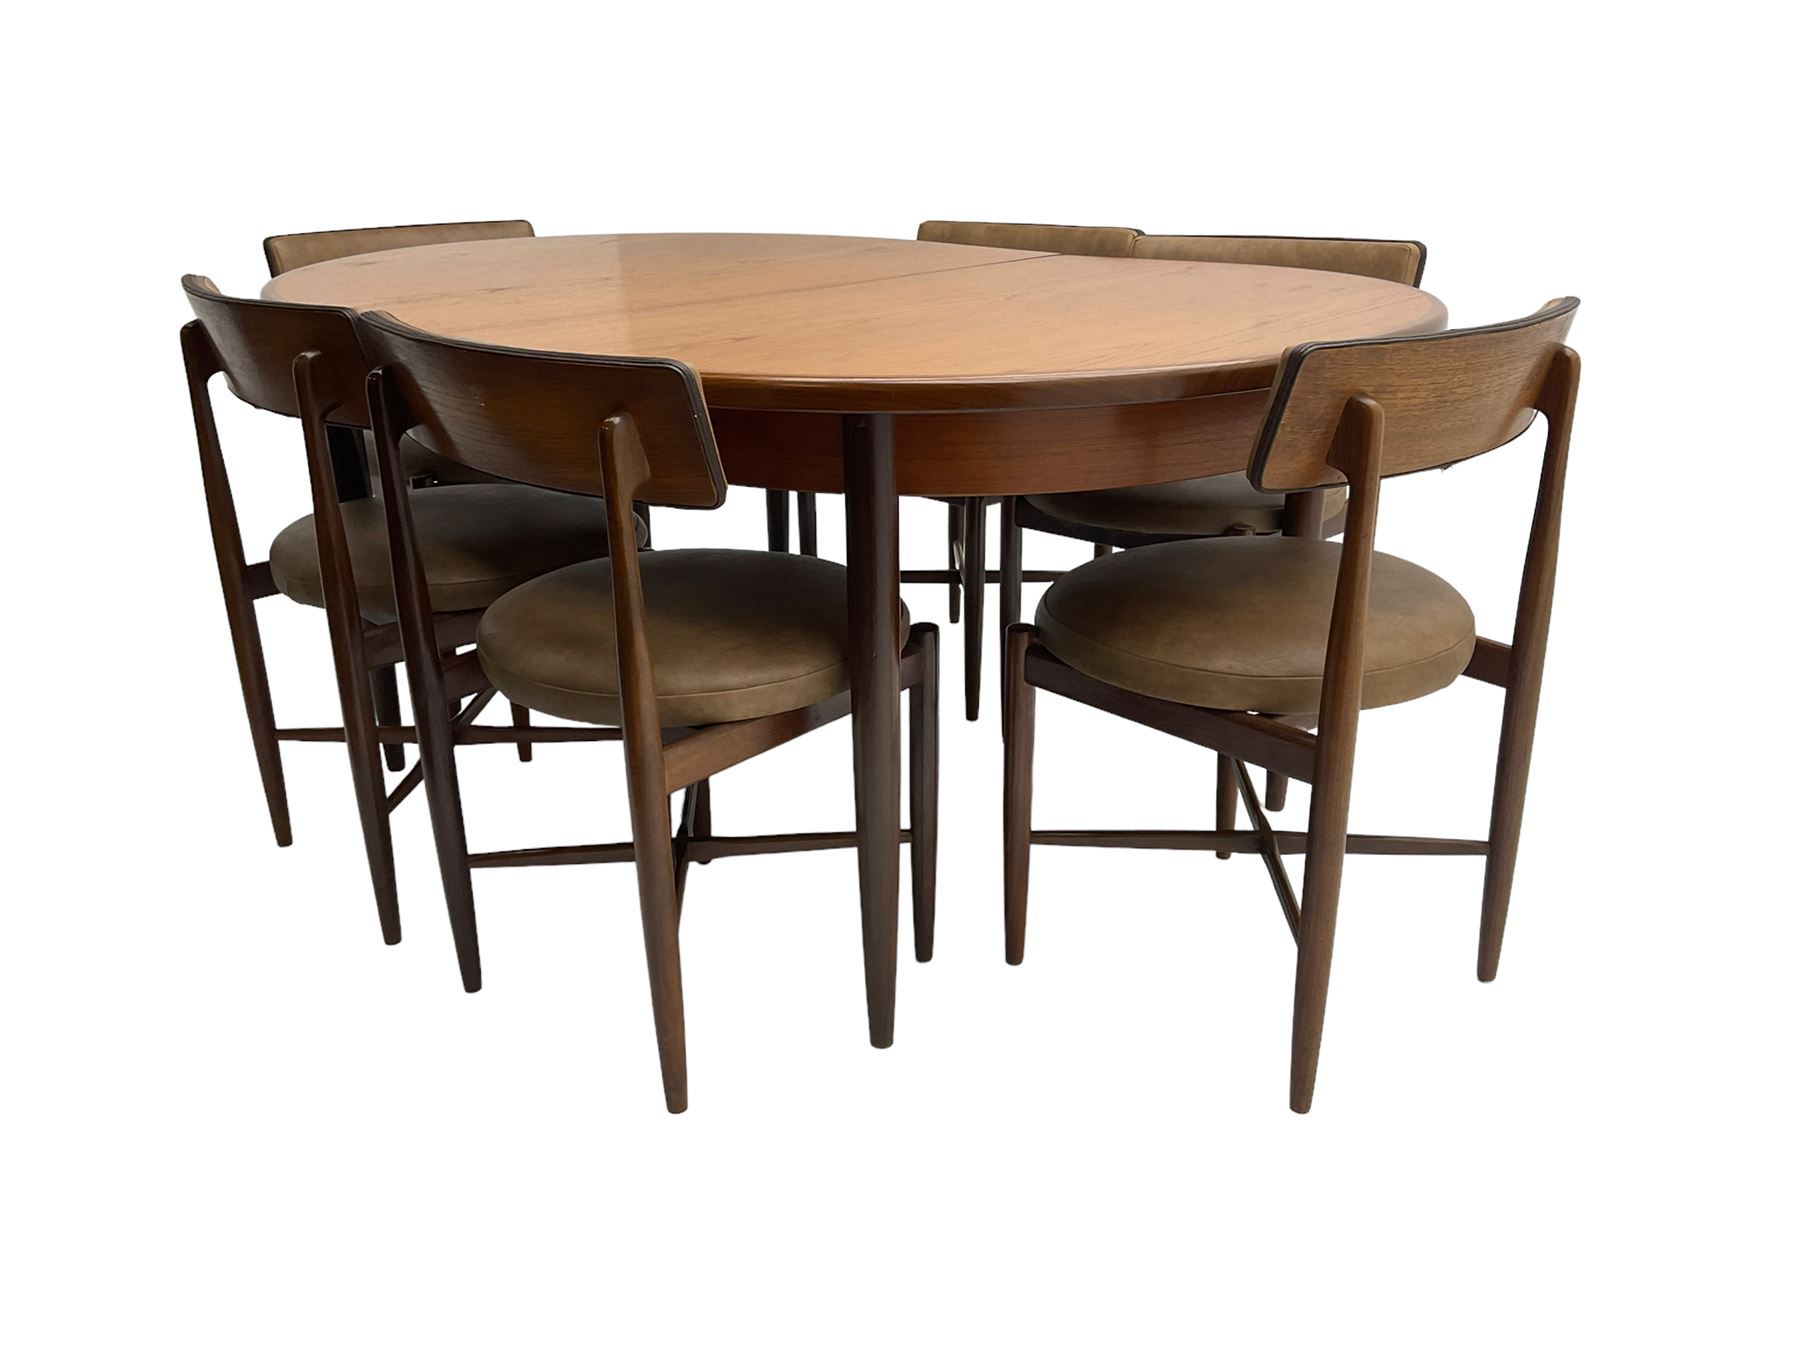 G-Plan - mid-20th century oval teak extending dining table and set six dining chairs - Image 2 of 6